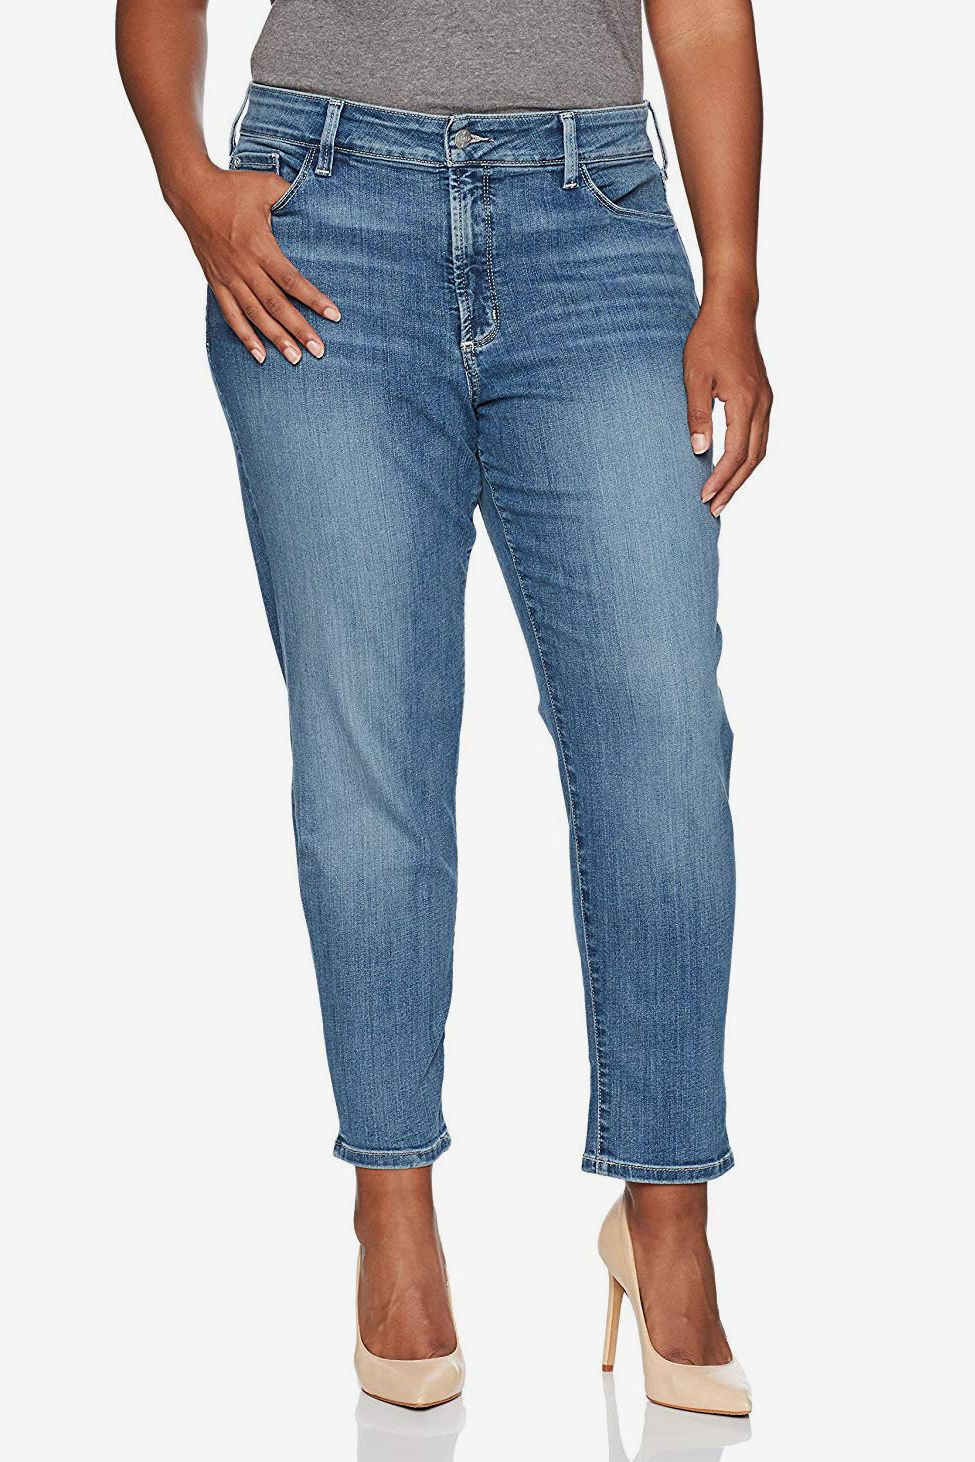 30 Best Jeans for Women of All Sizes and Styles 2019 | The Strategist ...